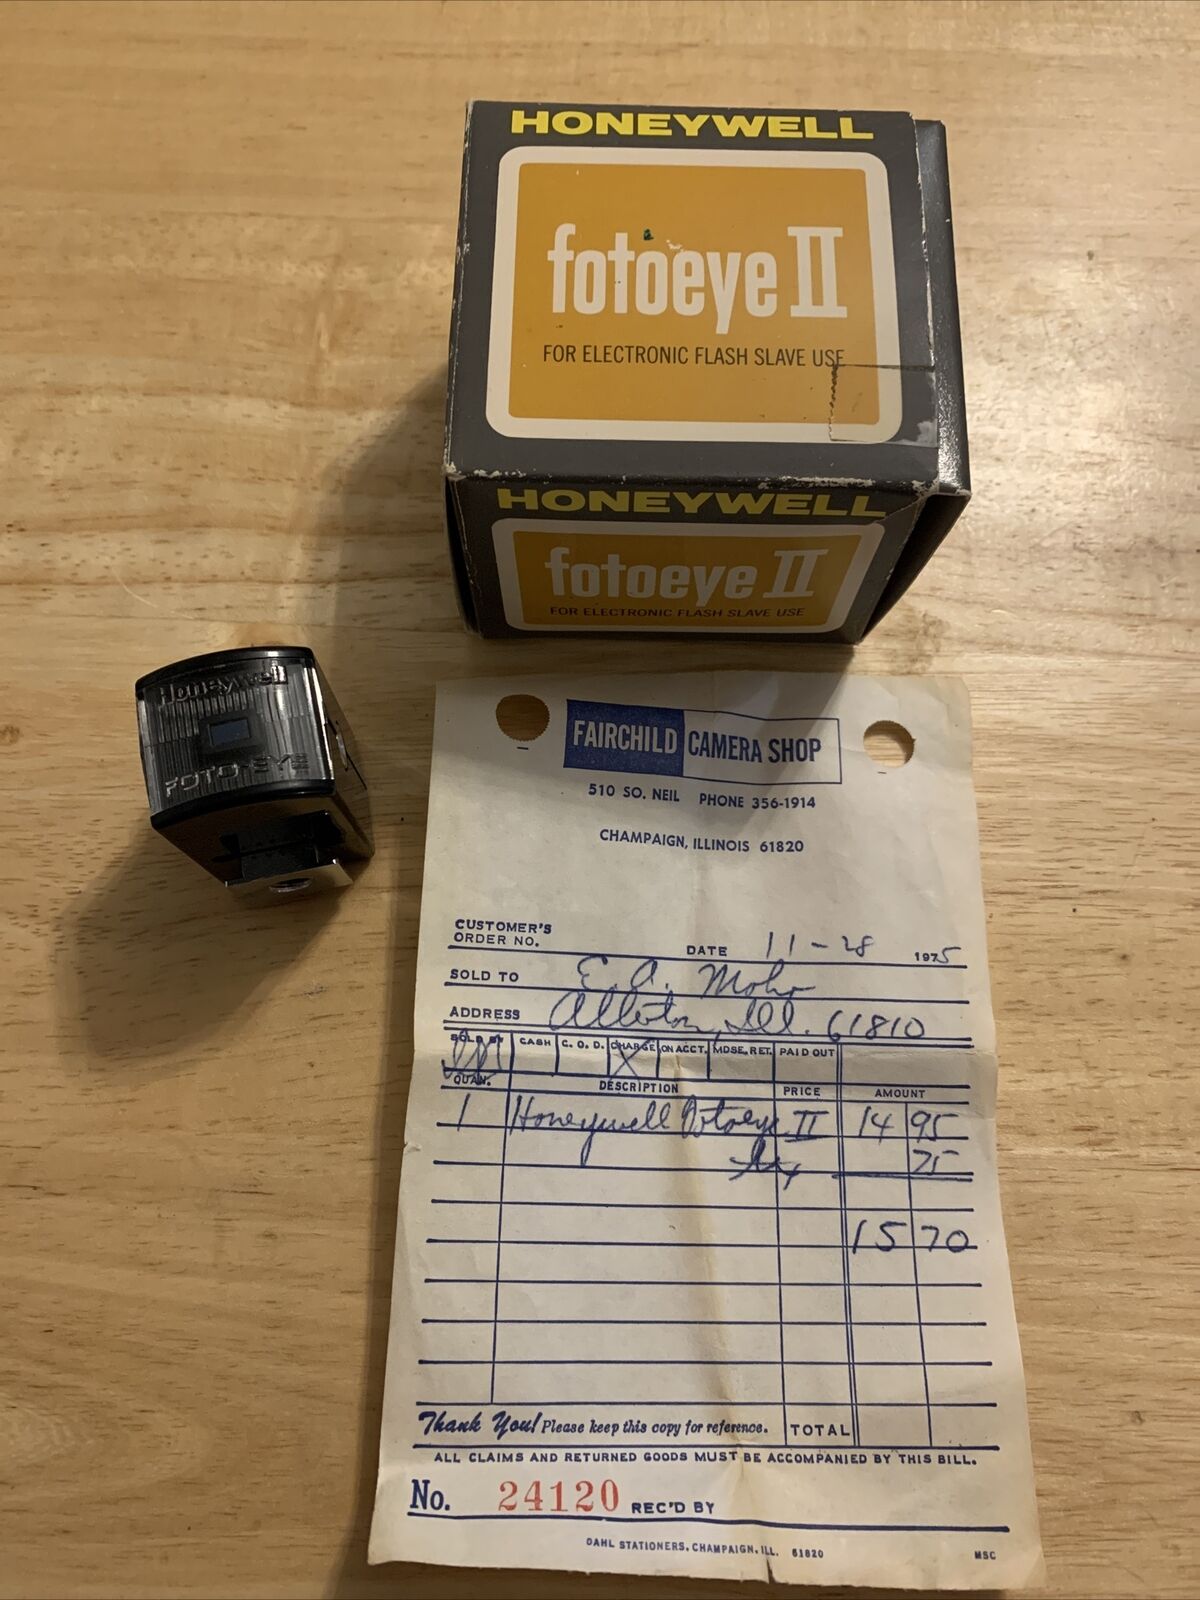 Honeywell Foto-Eye 2 For Electronic Flash Slave Use New in Box with Receipt